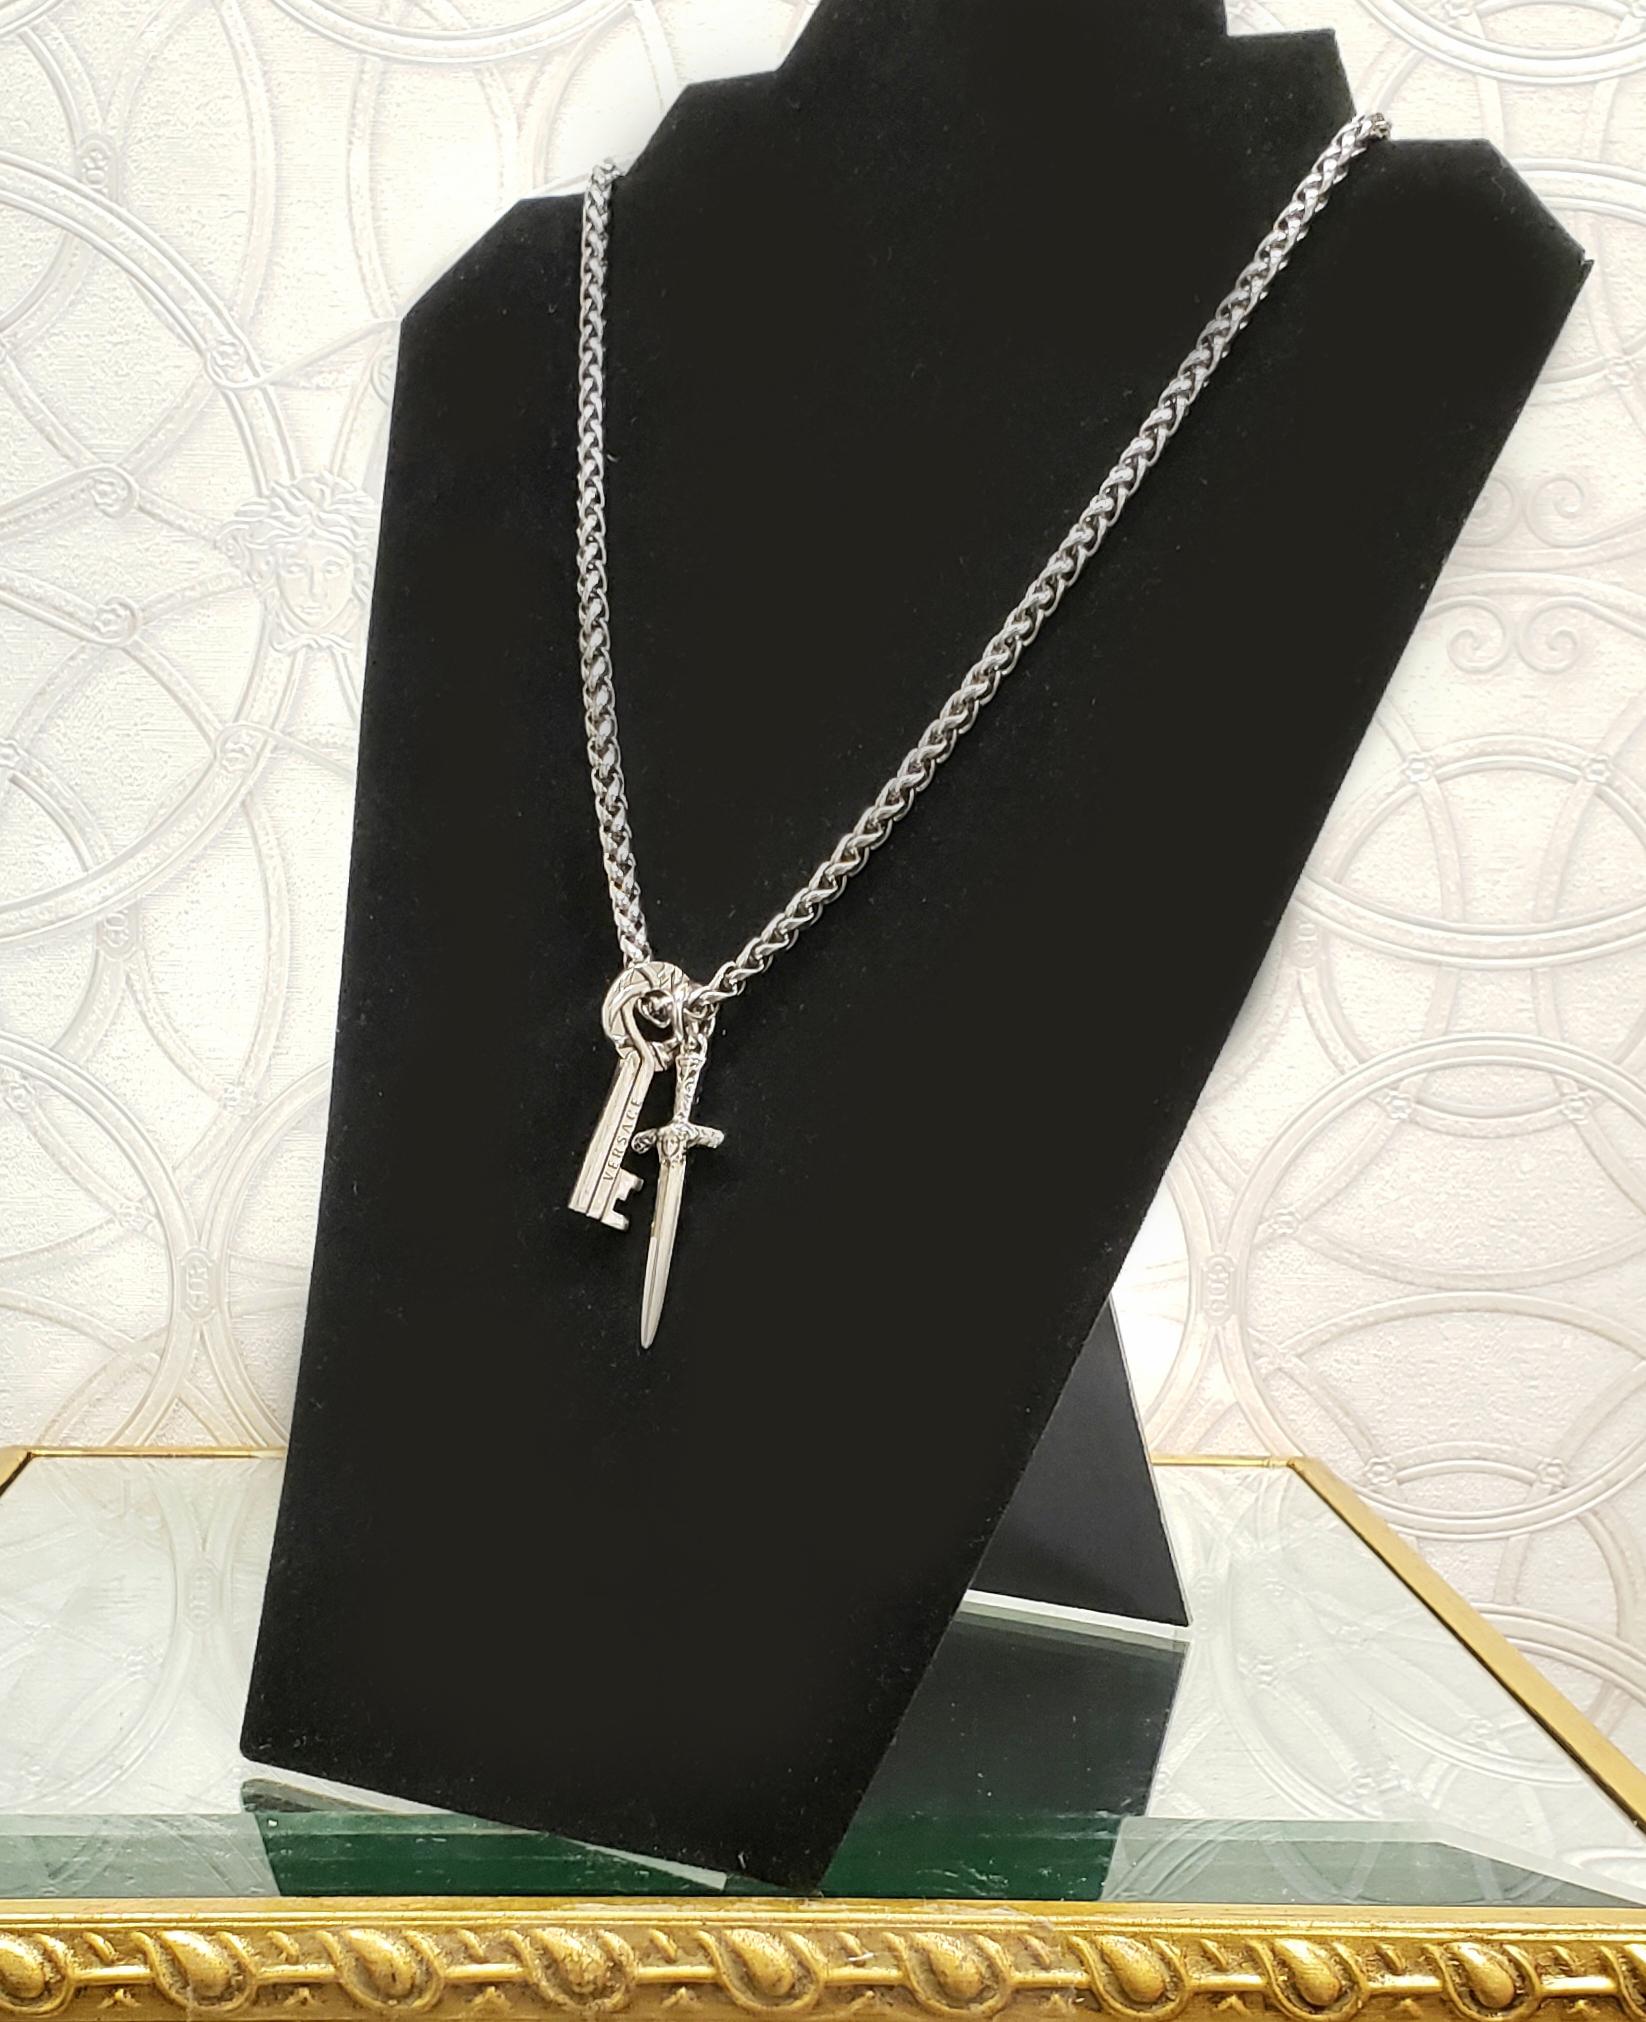 Women's or Men's Spring 2011 L# 43 NEW VERSACE SILVER TONE KEY and DAGGER METAL CHAIN